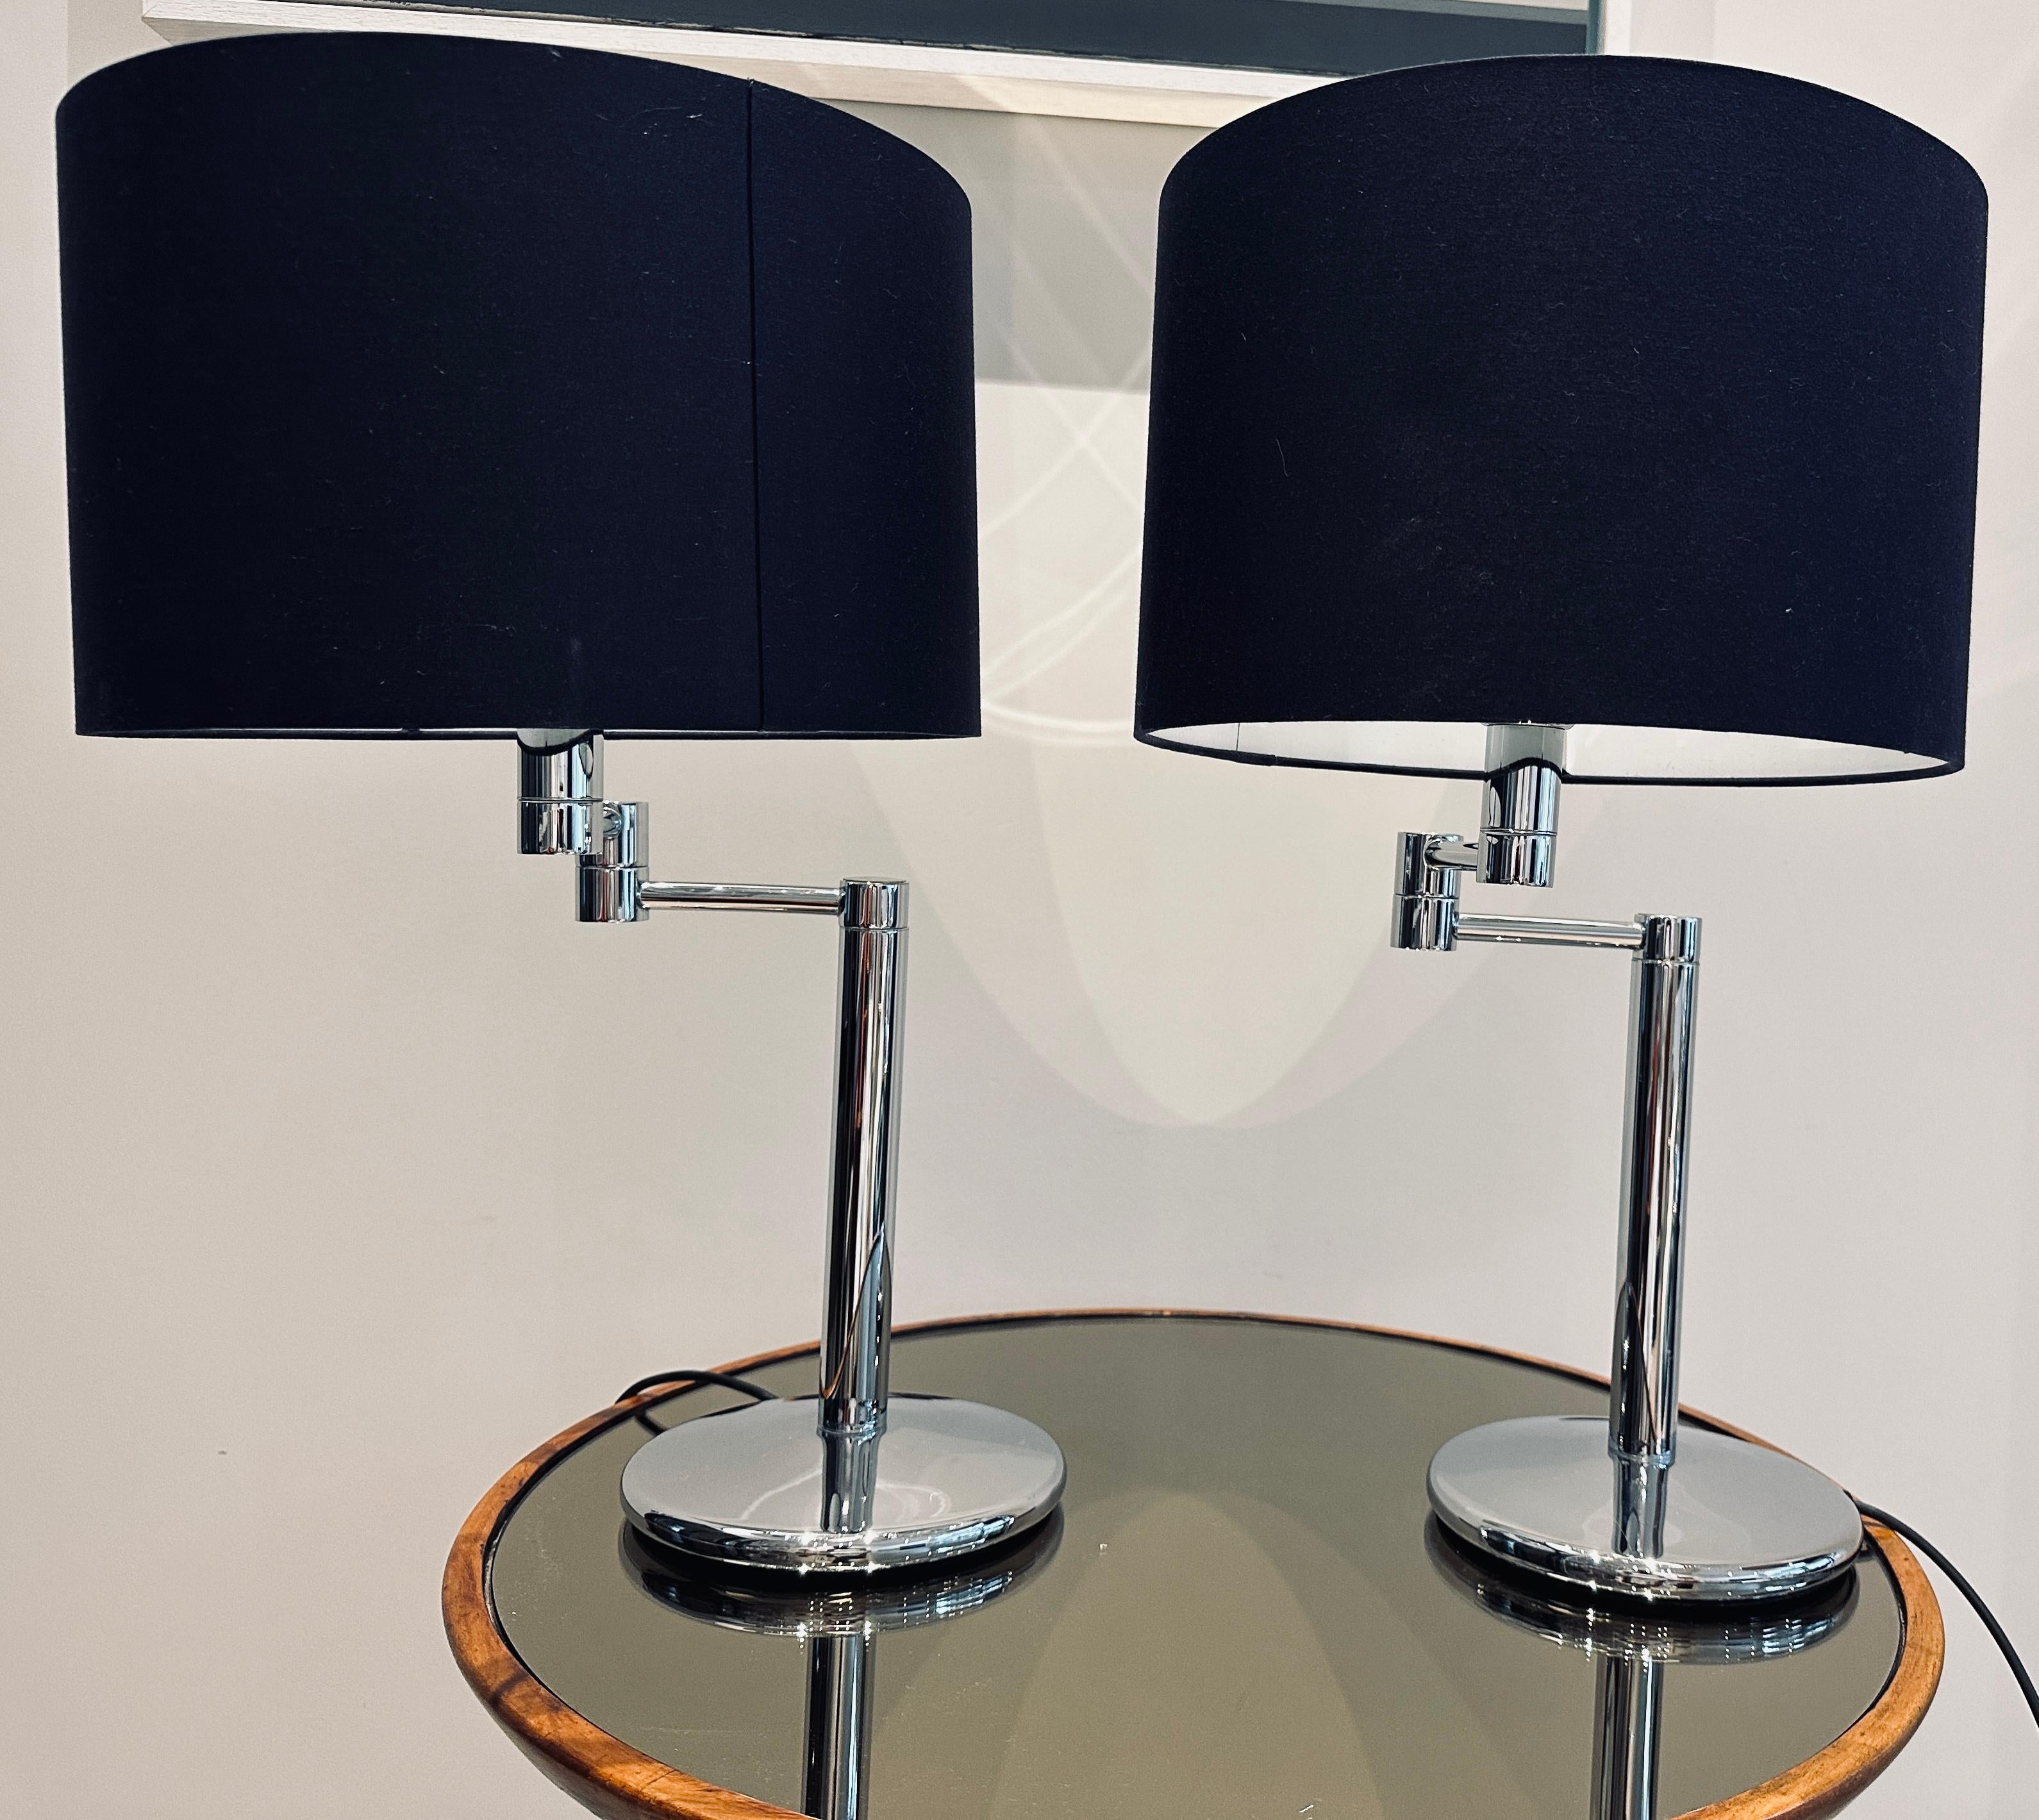 Polished Pair of 1970s American Walter Von Nessen Style Swing Arm Chrome Table Lamps For Sale